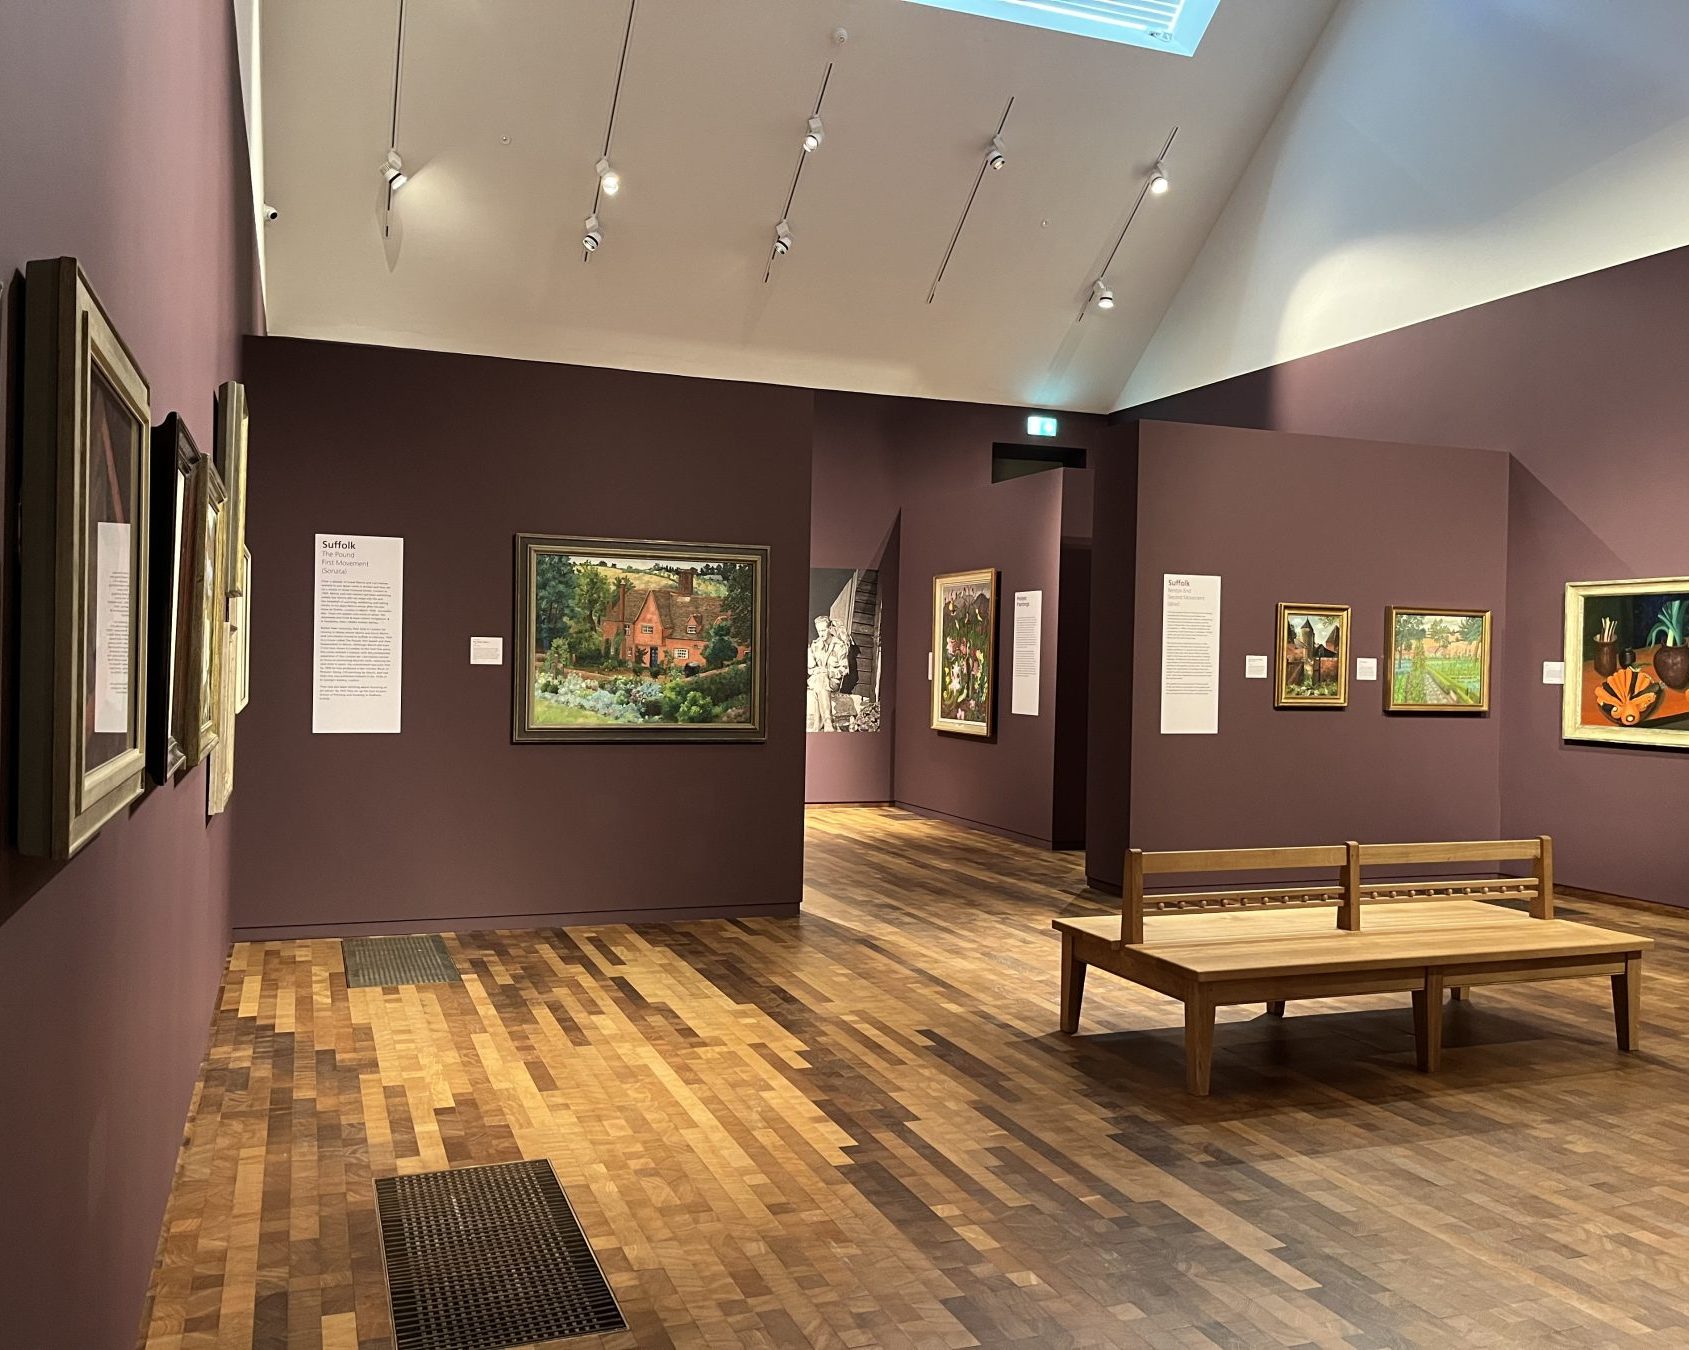 An image taken of the exhibition, Revealing Nature: The Art of Cedric Morris & Lett–Haines, in the Timothy & Mary Clode Exhibition Gallery at Gainsborough's House. There are various artworks hung on plum coloured walls.